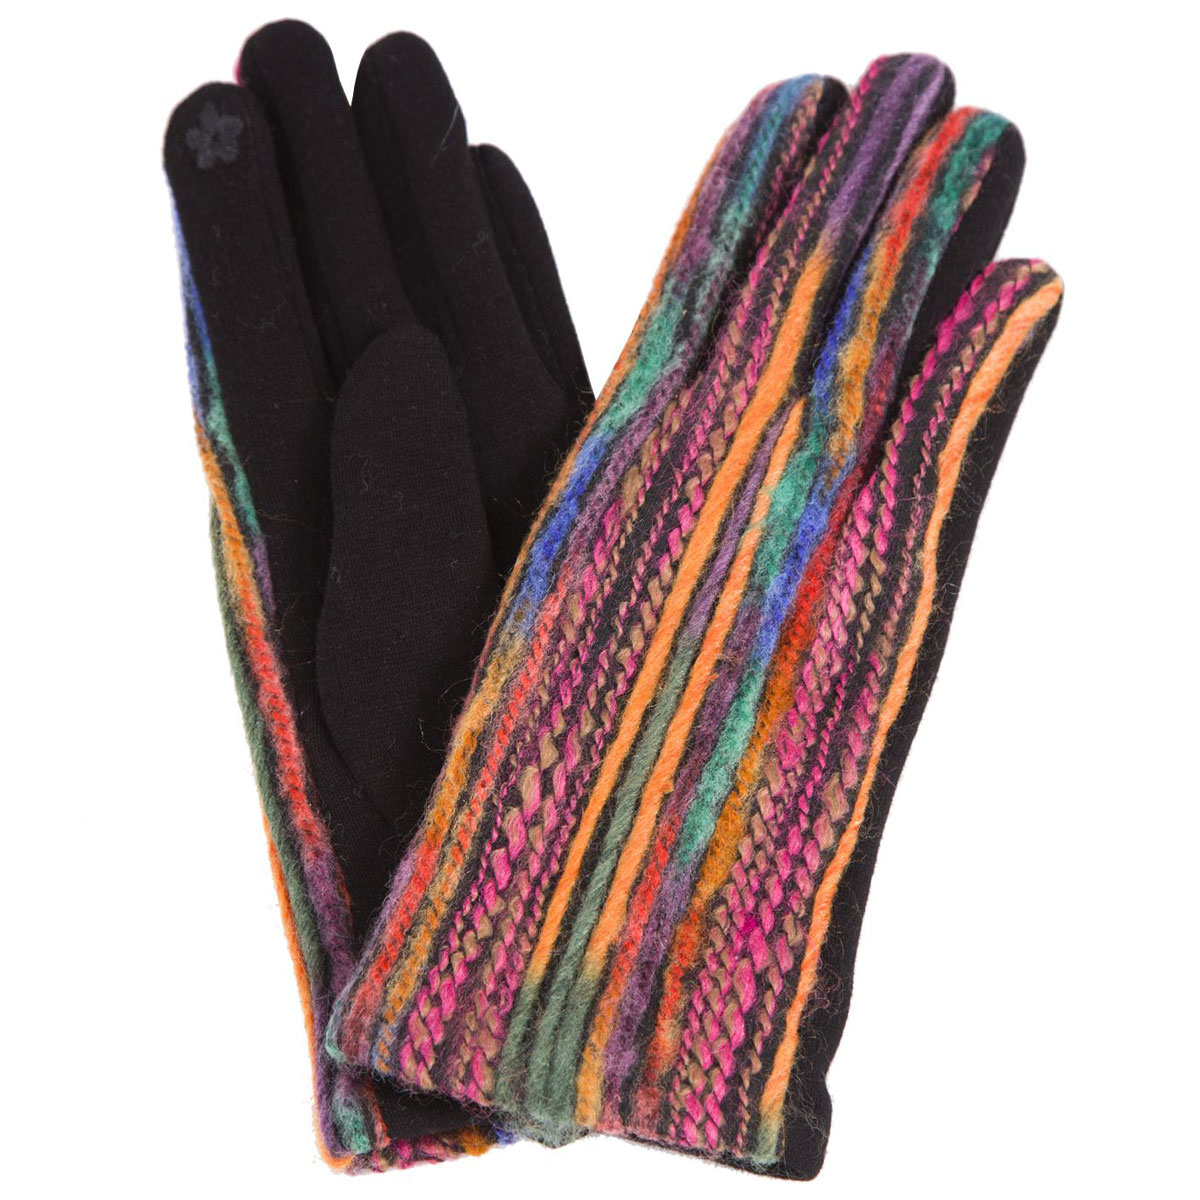 2390 - Touch Screen Smart Gloves 842-MU <BR>Yarn Design - One Size Fits Most